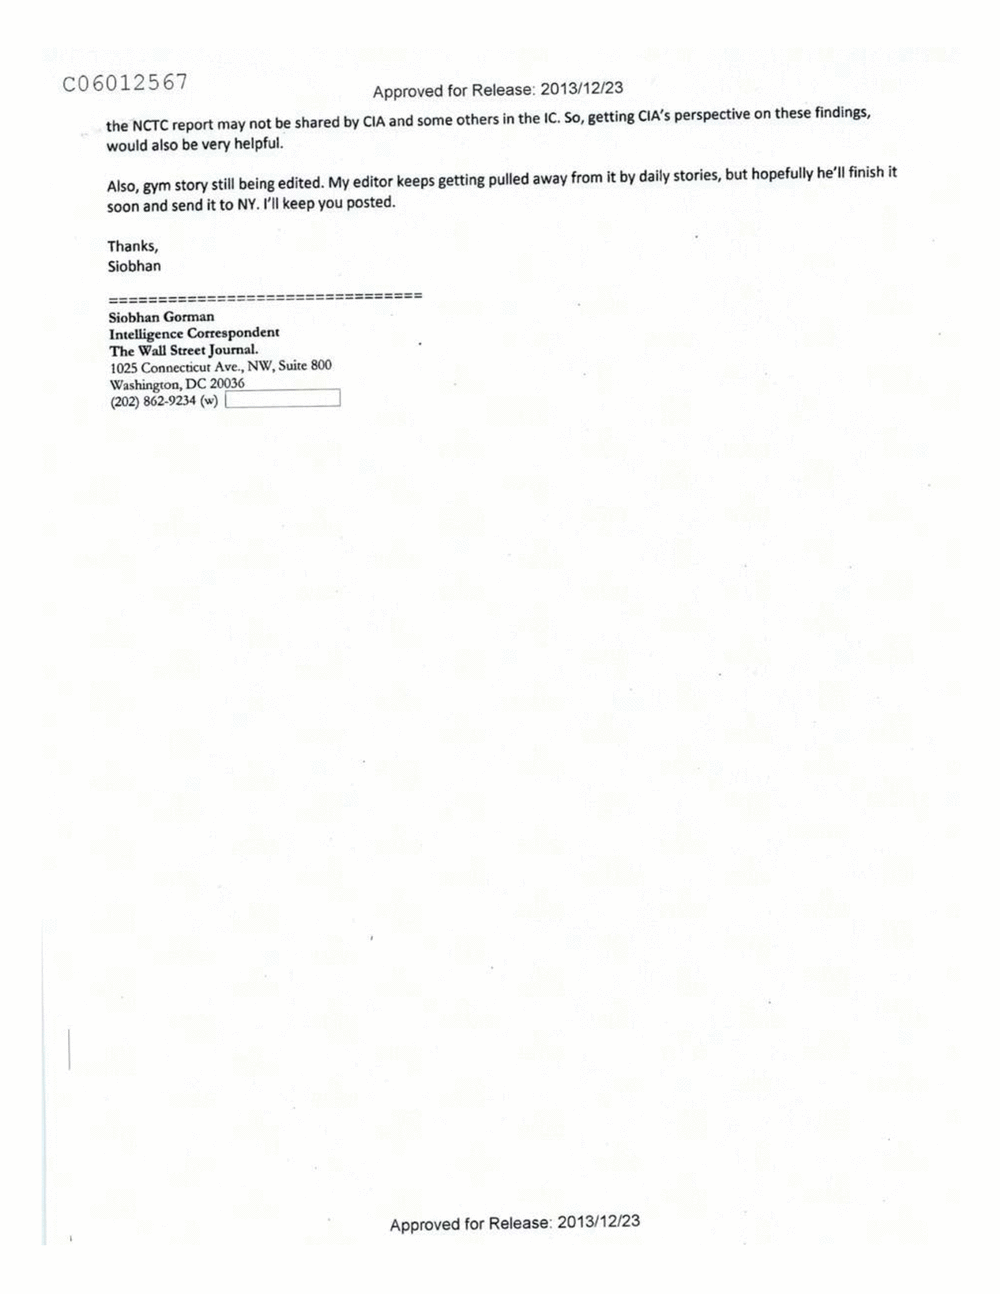 Page 99 from Email Correspondence Between Reporters and CIA Flacks